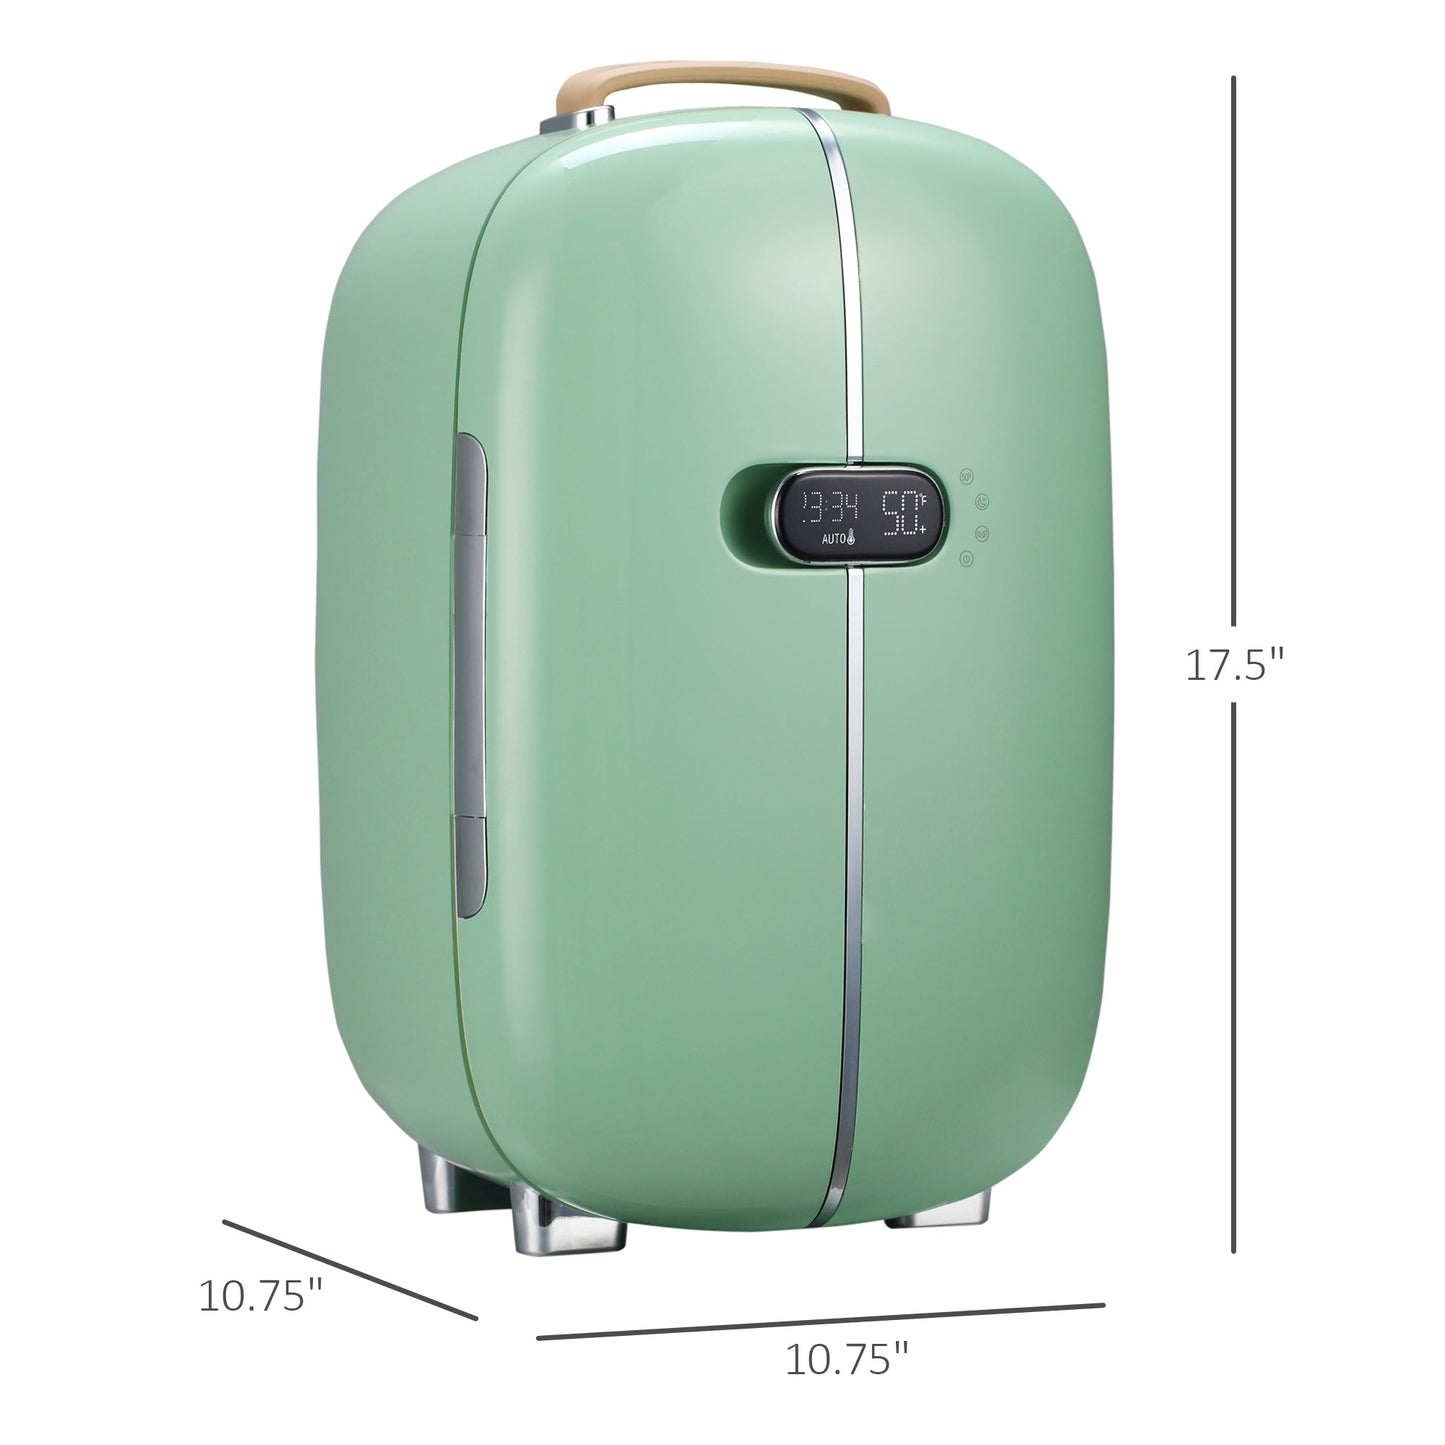 -HOMCOM Portable Beauty Fridge, Professional Skincare Fridge with LED Lighting, Timer and 2 Doors, 12L Cooler and Warmer for Beauty, Makeup, Green - Outdoor Style Company